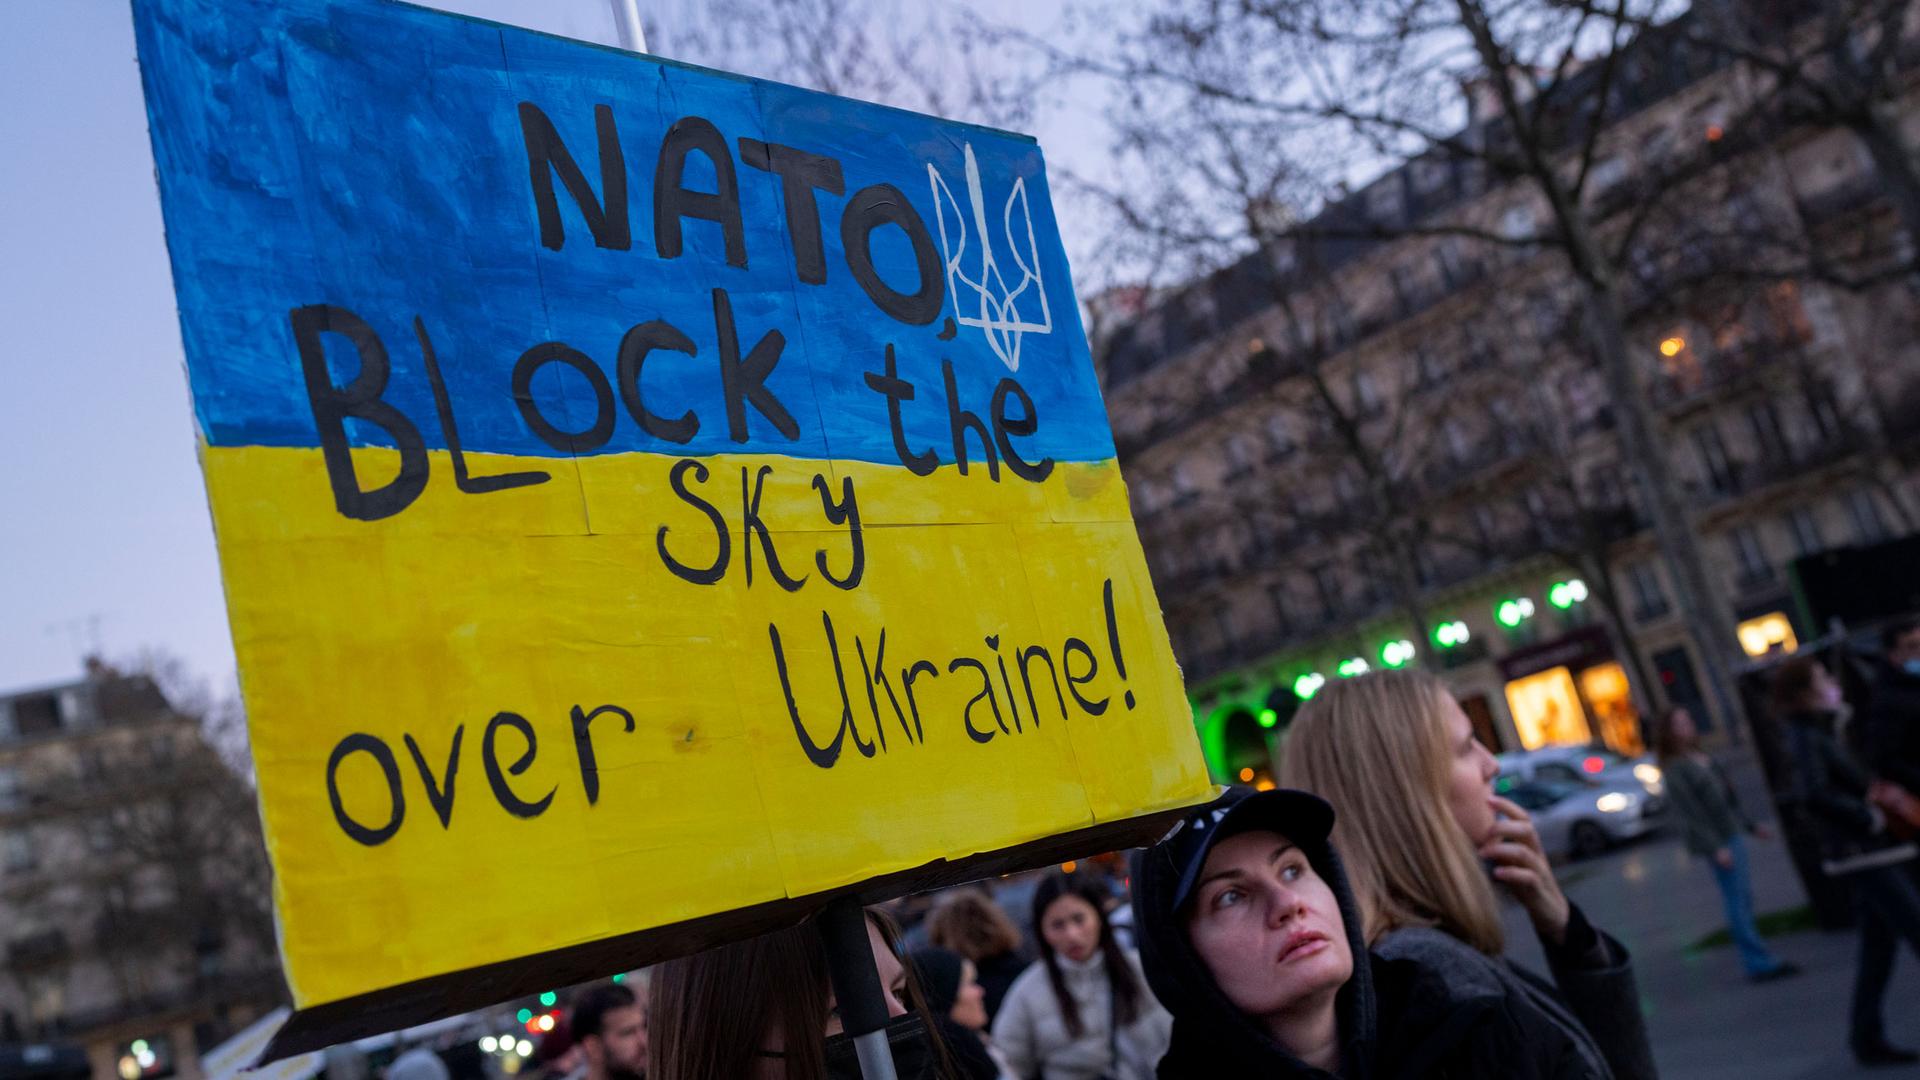 A protester calls for on NATO to enforce a no-fly zone over the Ukraine during a demonstration in Paris, France, Saturday, Feb. 26, 2022.